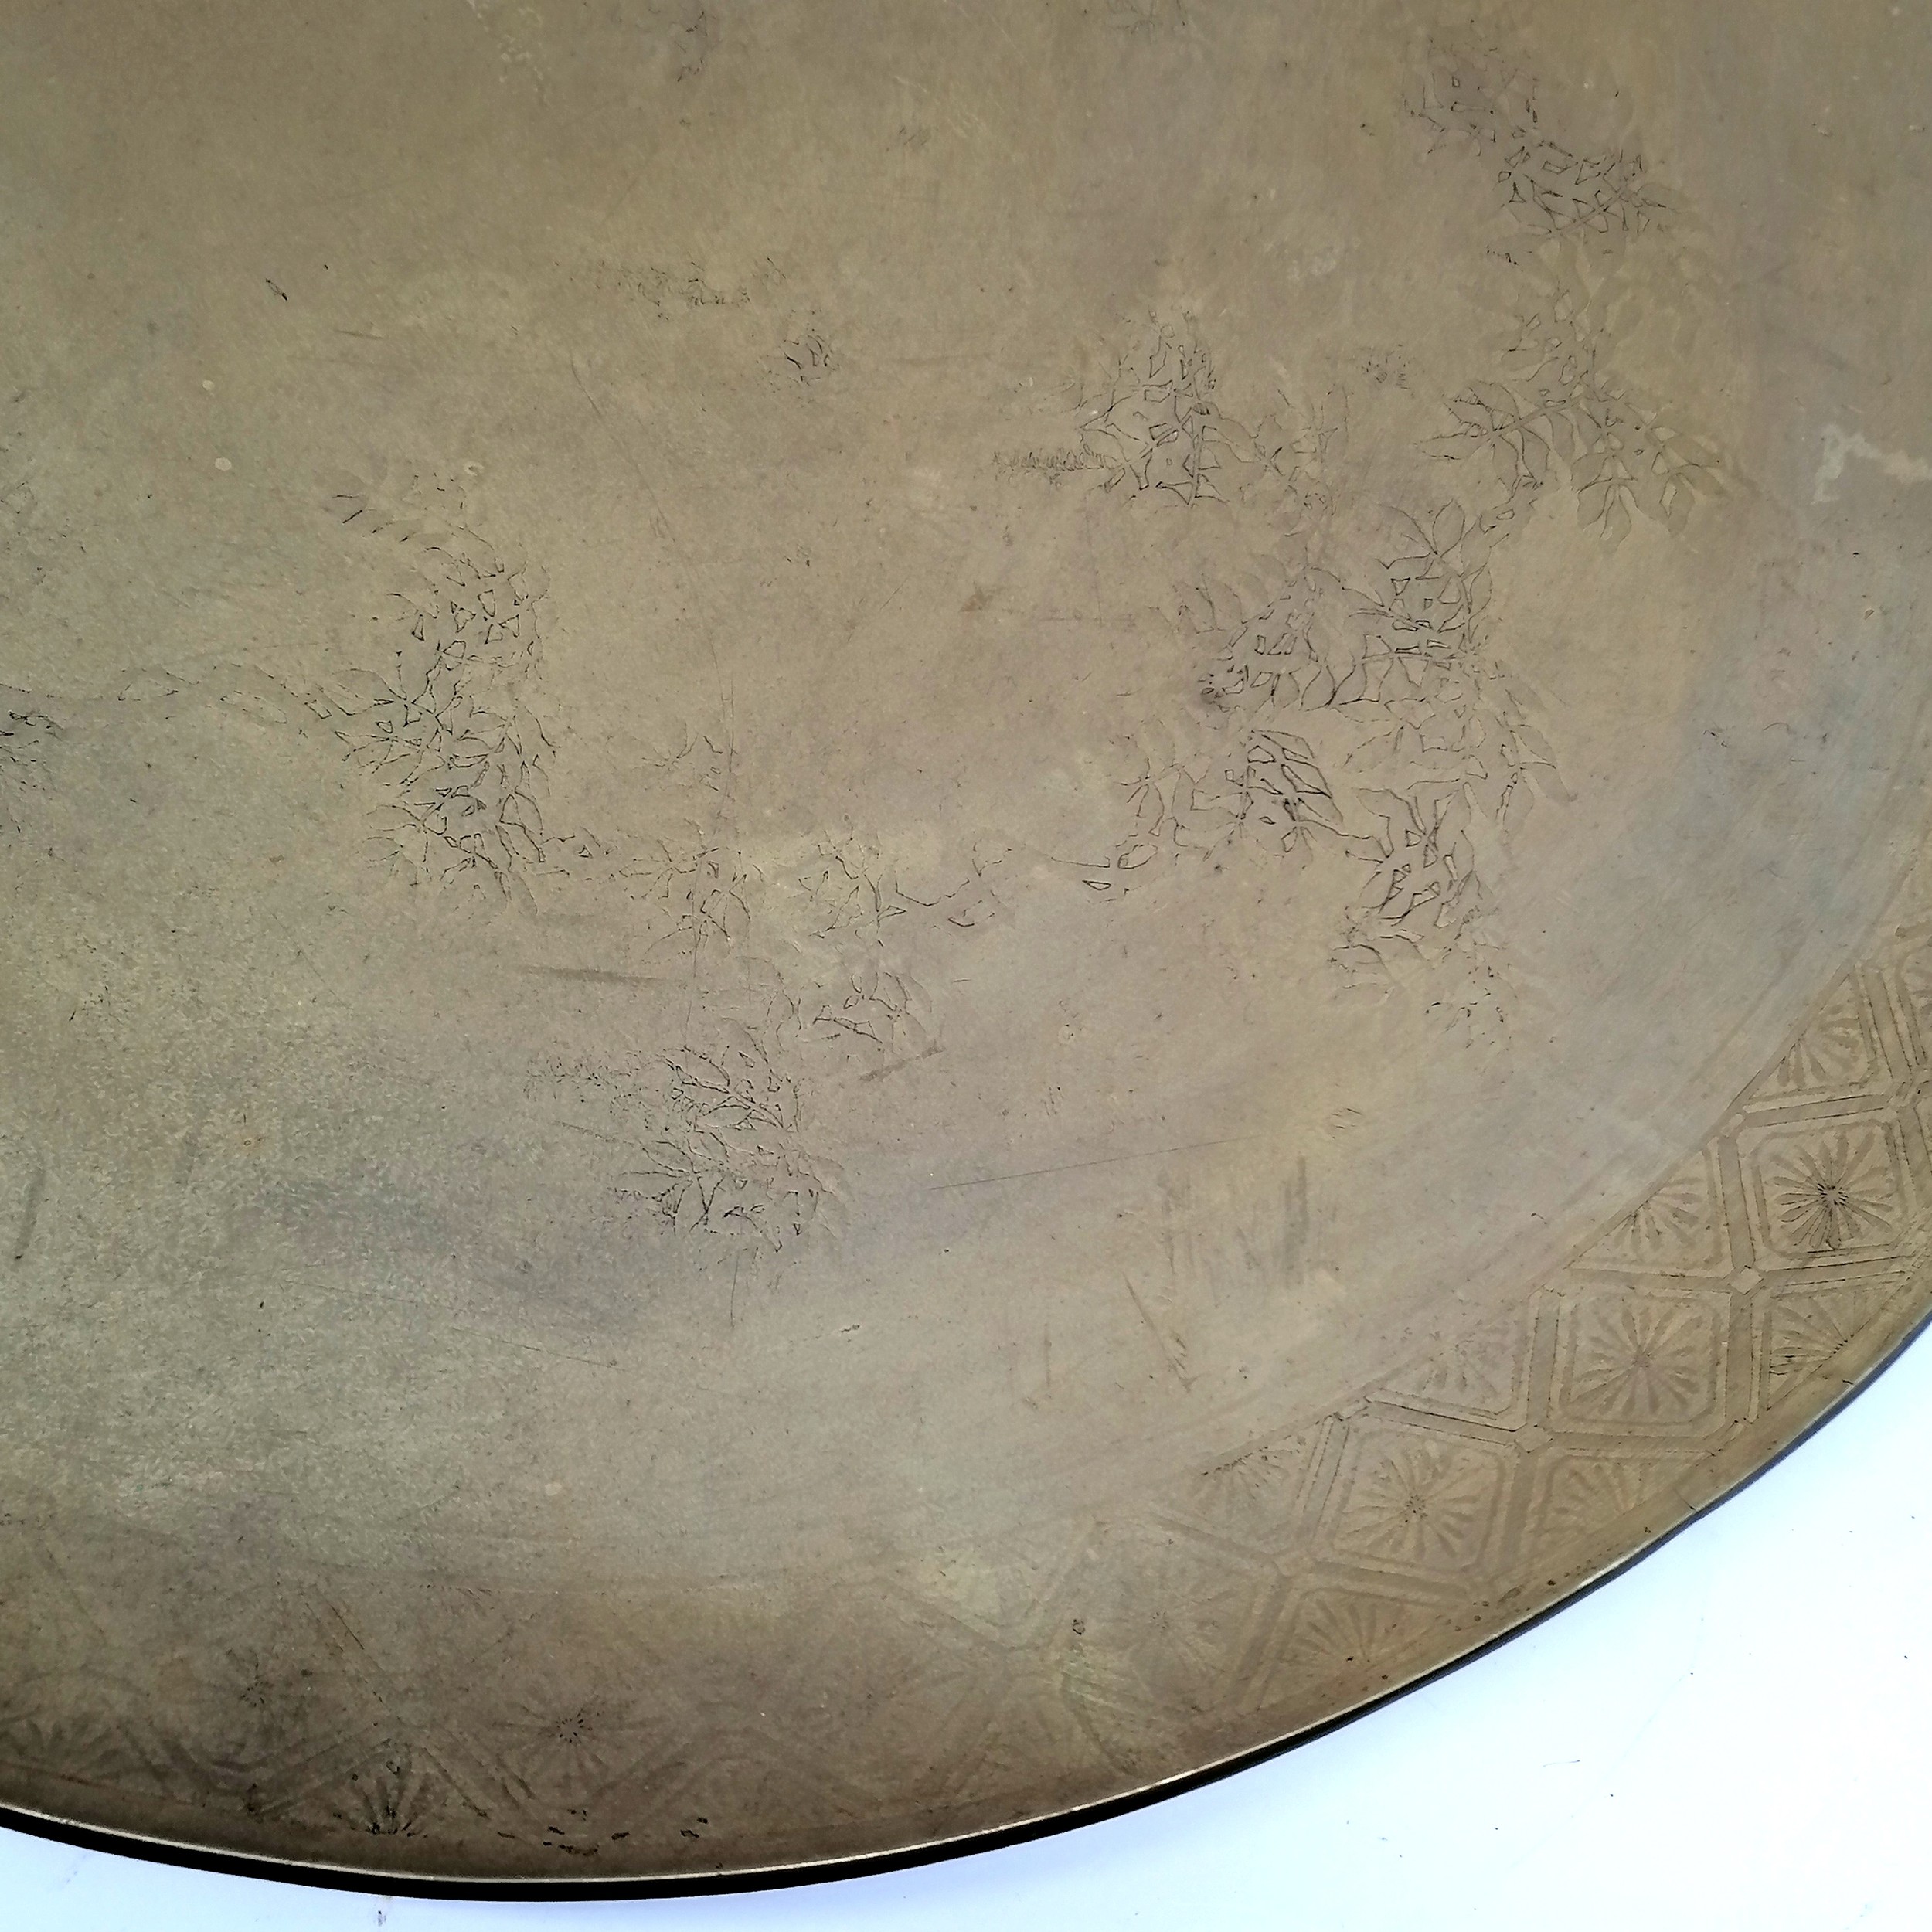 Large bronze Oriental platter - 61cm diameter & 8.8kg and has repeat pattern border and bamboo - Image 5 of 5